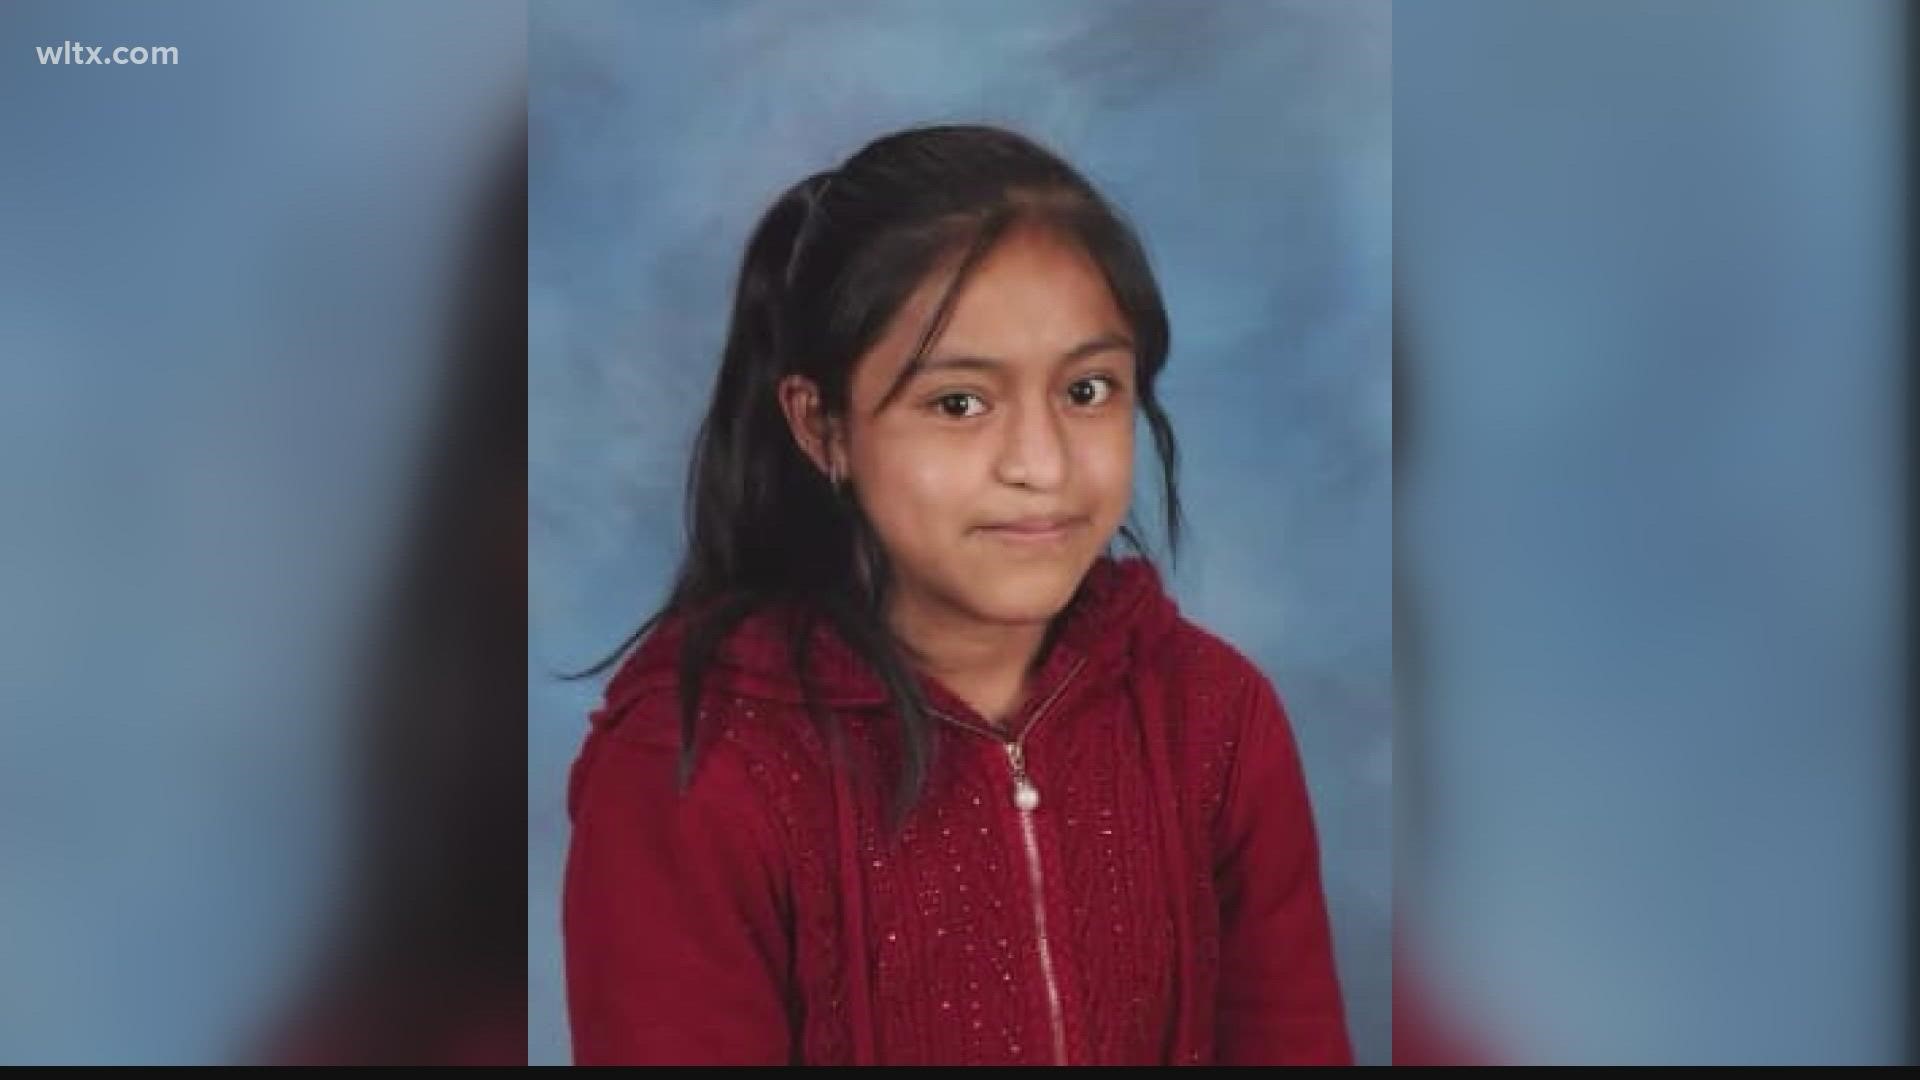 The Richland County Sheriff's Department says a missing 10-year-old girl has been found safe in another state.